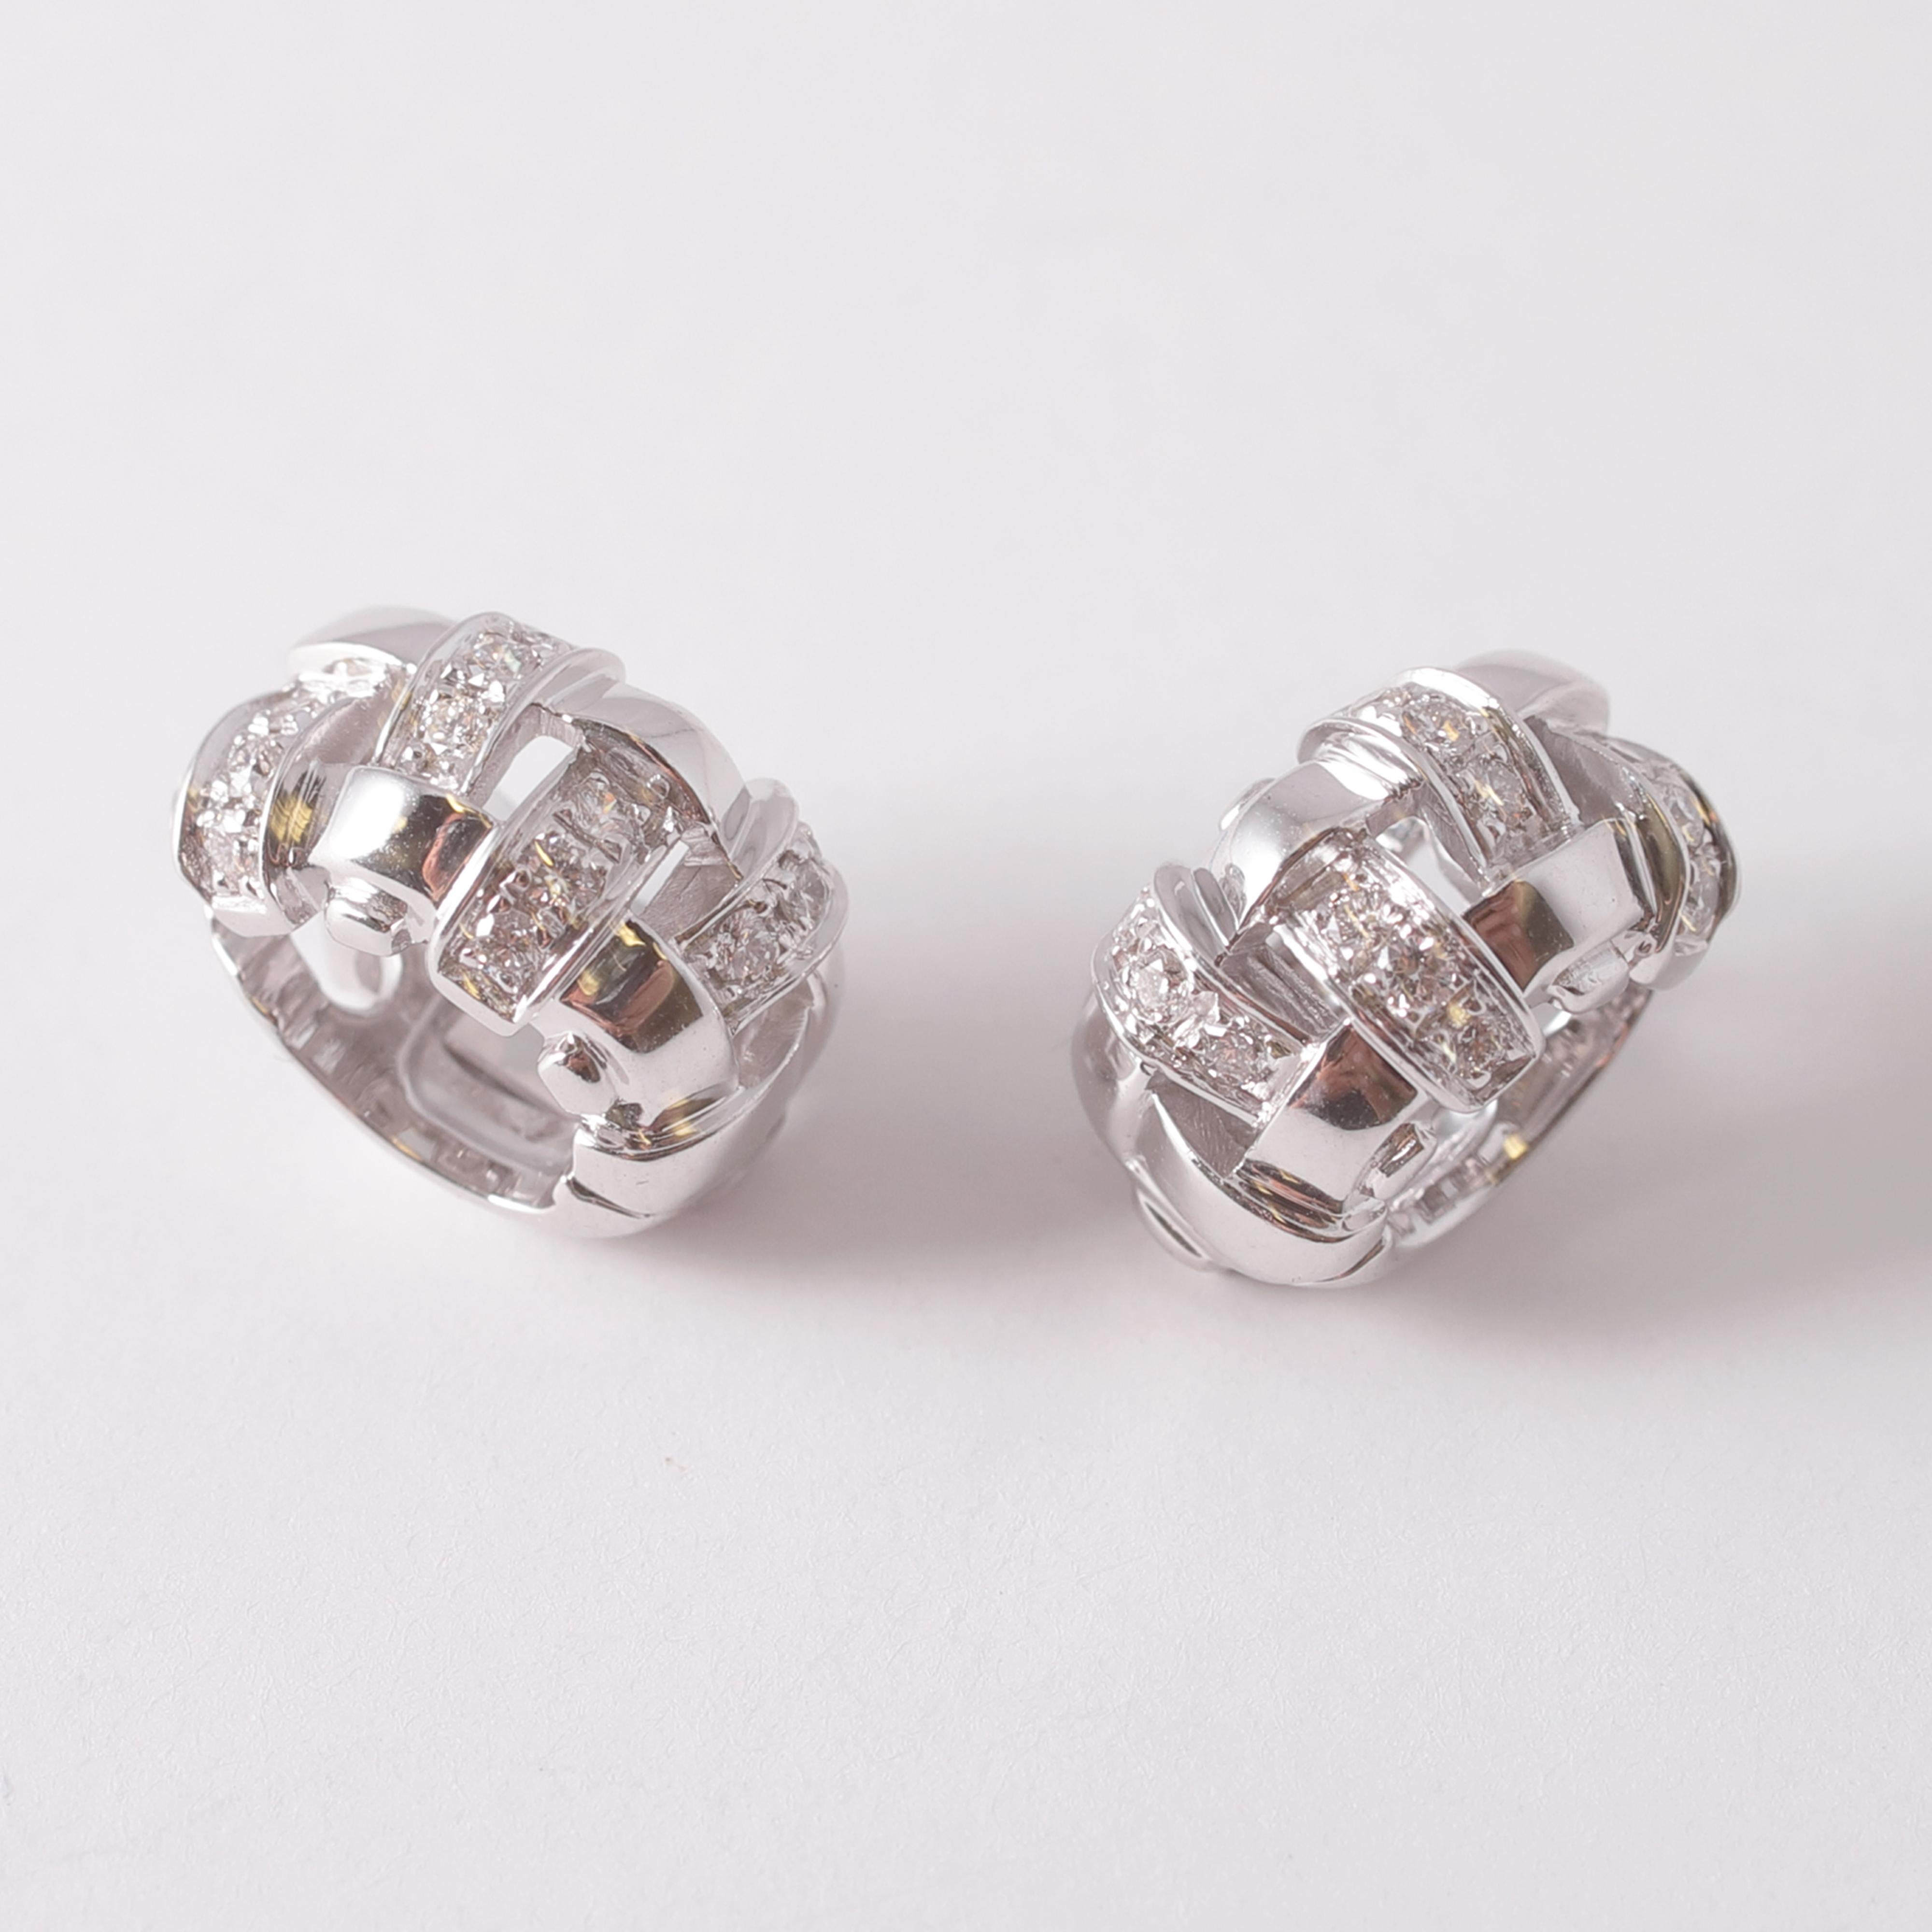 So very comfortable on the ear!  These white gold earrings by Tiffany & Co are in a basket weave style and support 0.40 carats of diamonds. 